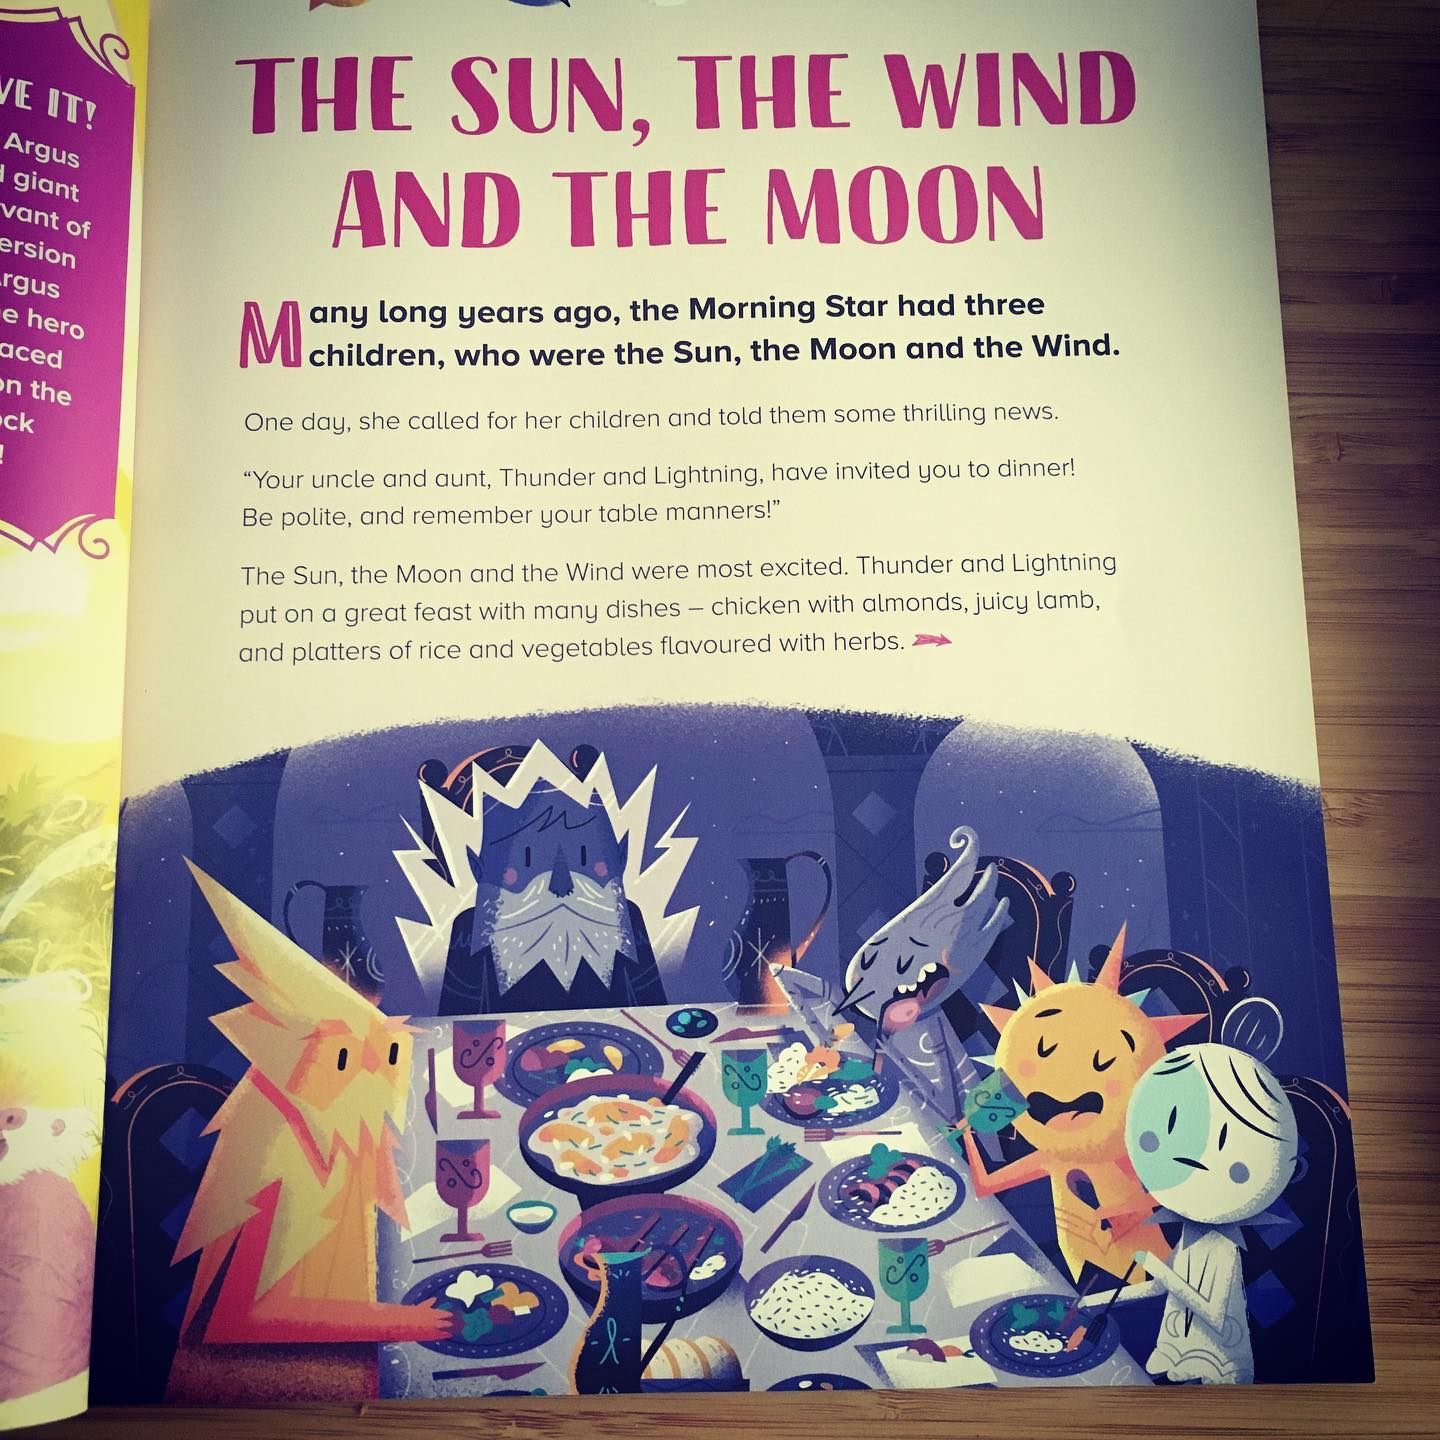 :::The Sun, the Wind and the Moon:::Illustrations I made for the Storytime Magazine (issue 85)@storytimemag ..#illustration  #childrenbookart #childrenillustration #storytelling #storytimemagazine #moon #sun #elements #εικονογράφηση #sounasart #childrenbookart #children_illustration #kidsillustartion #illustation_best